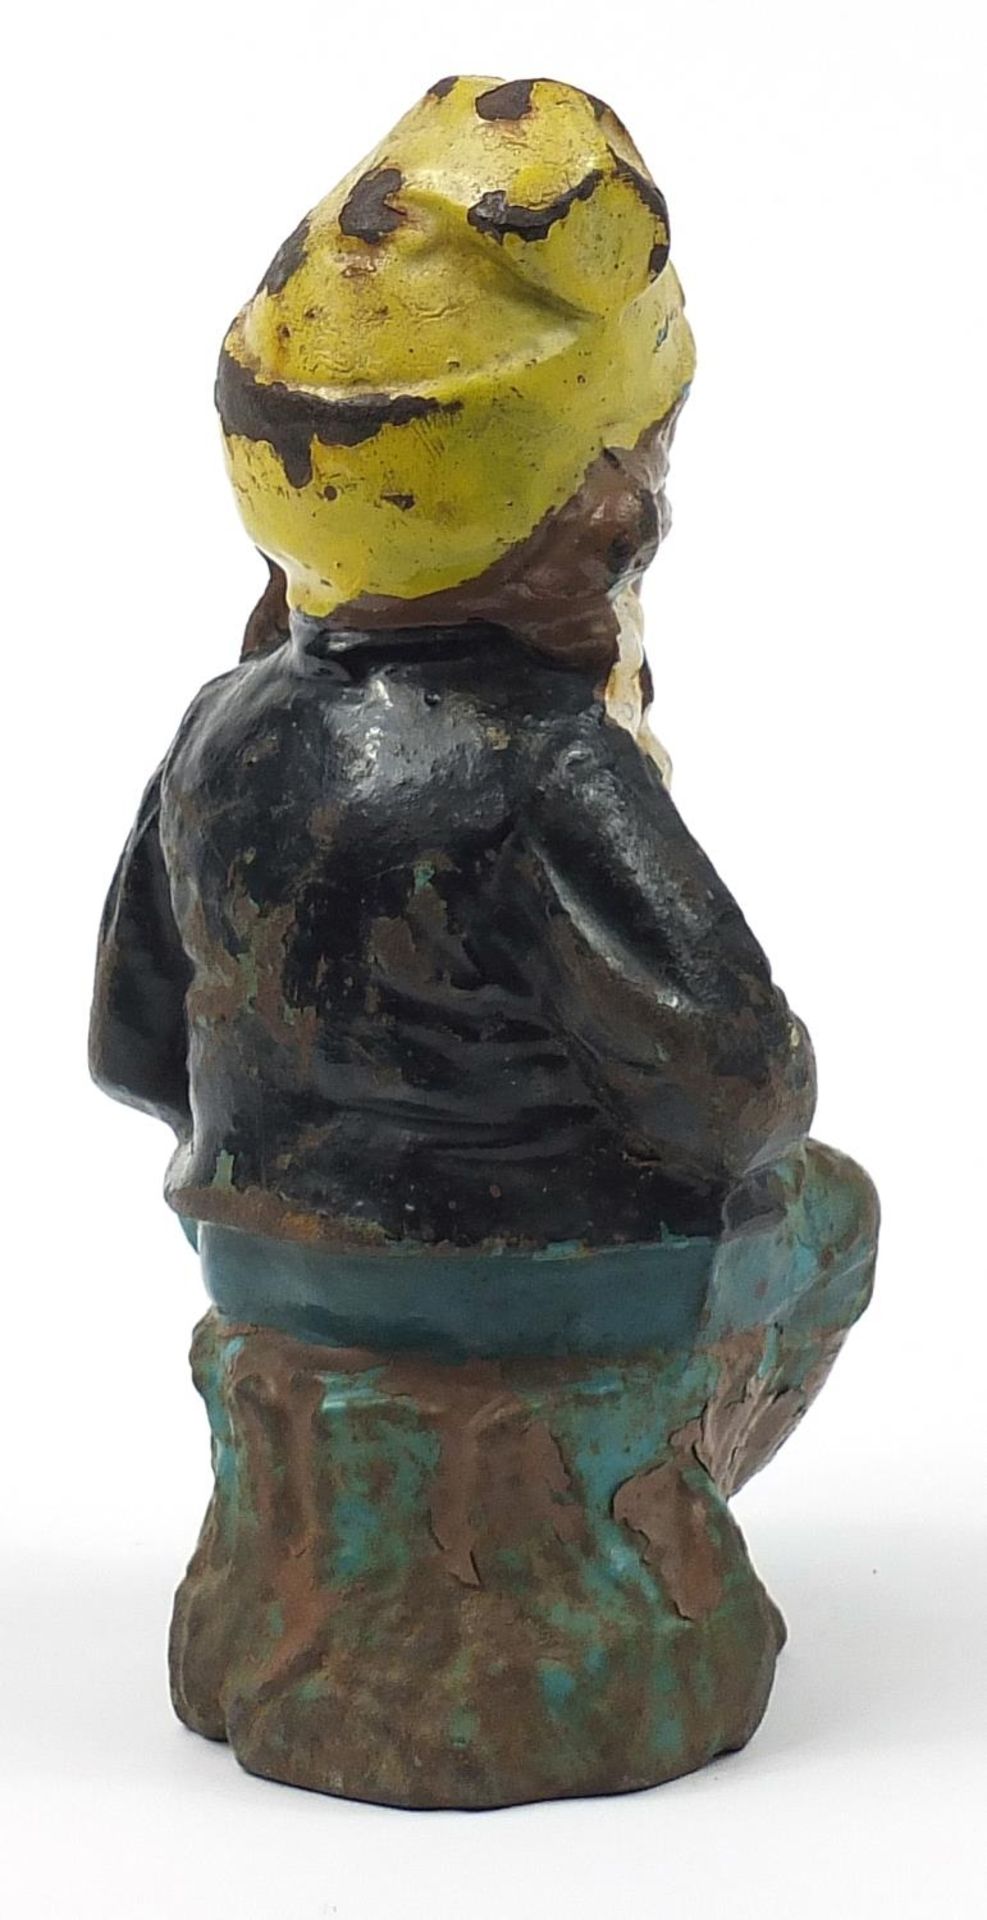 Painted cast iron advertising Record gnome, 25.5cm high - Image 2 of 3